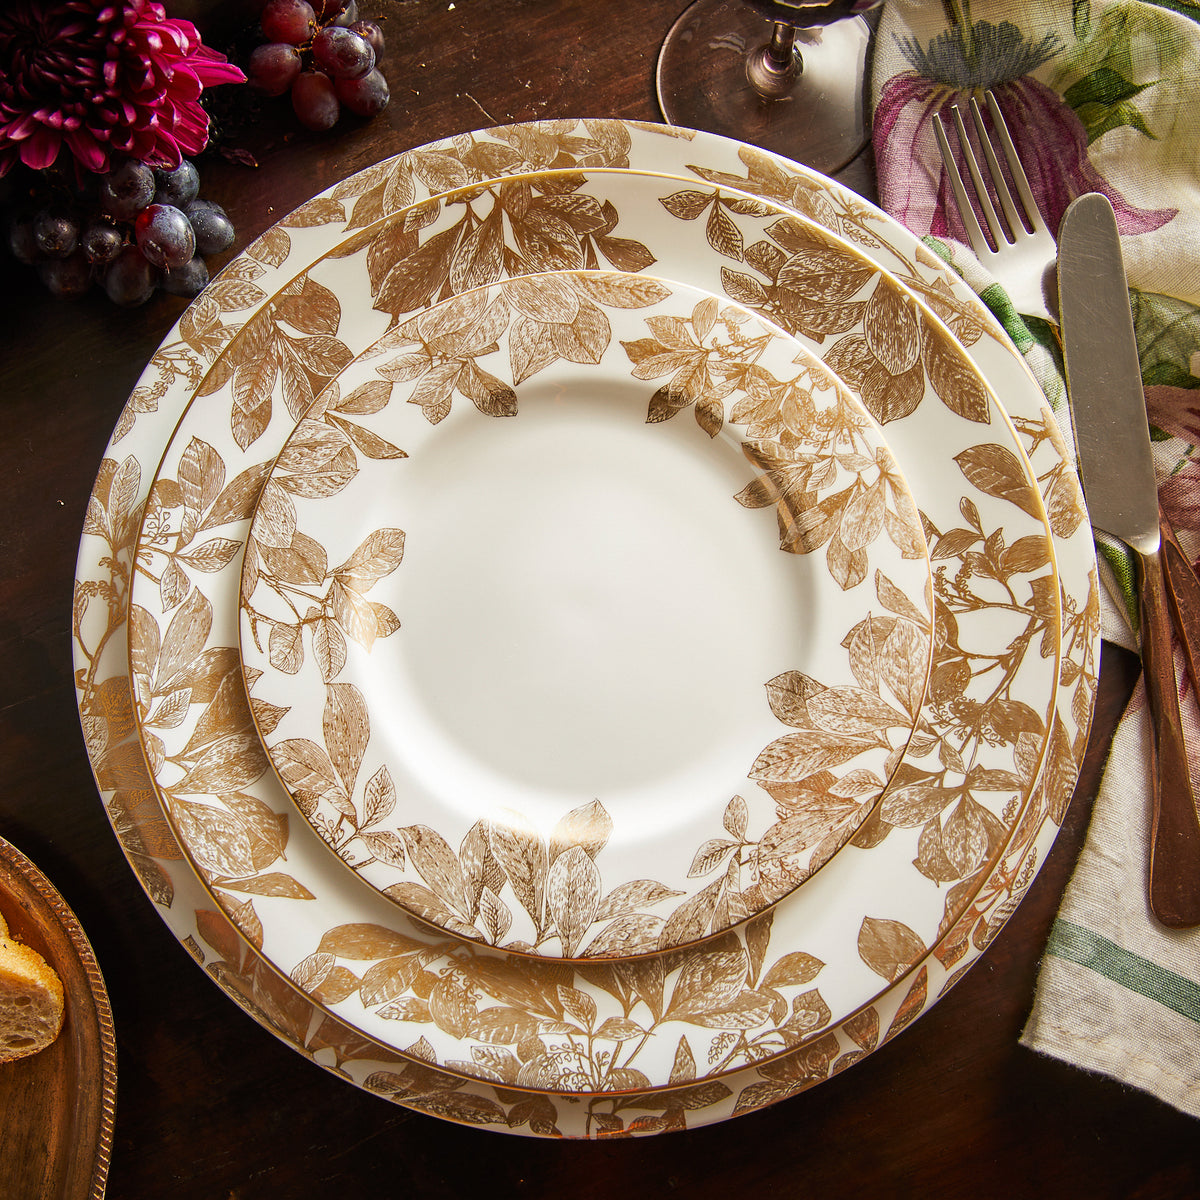 An Arbor Gold Rimmed Dinner Plate with a floral pattern, made by Caskata Artisanal Home.